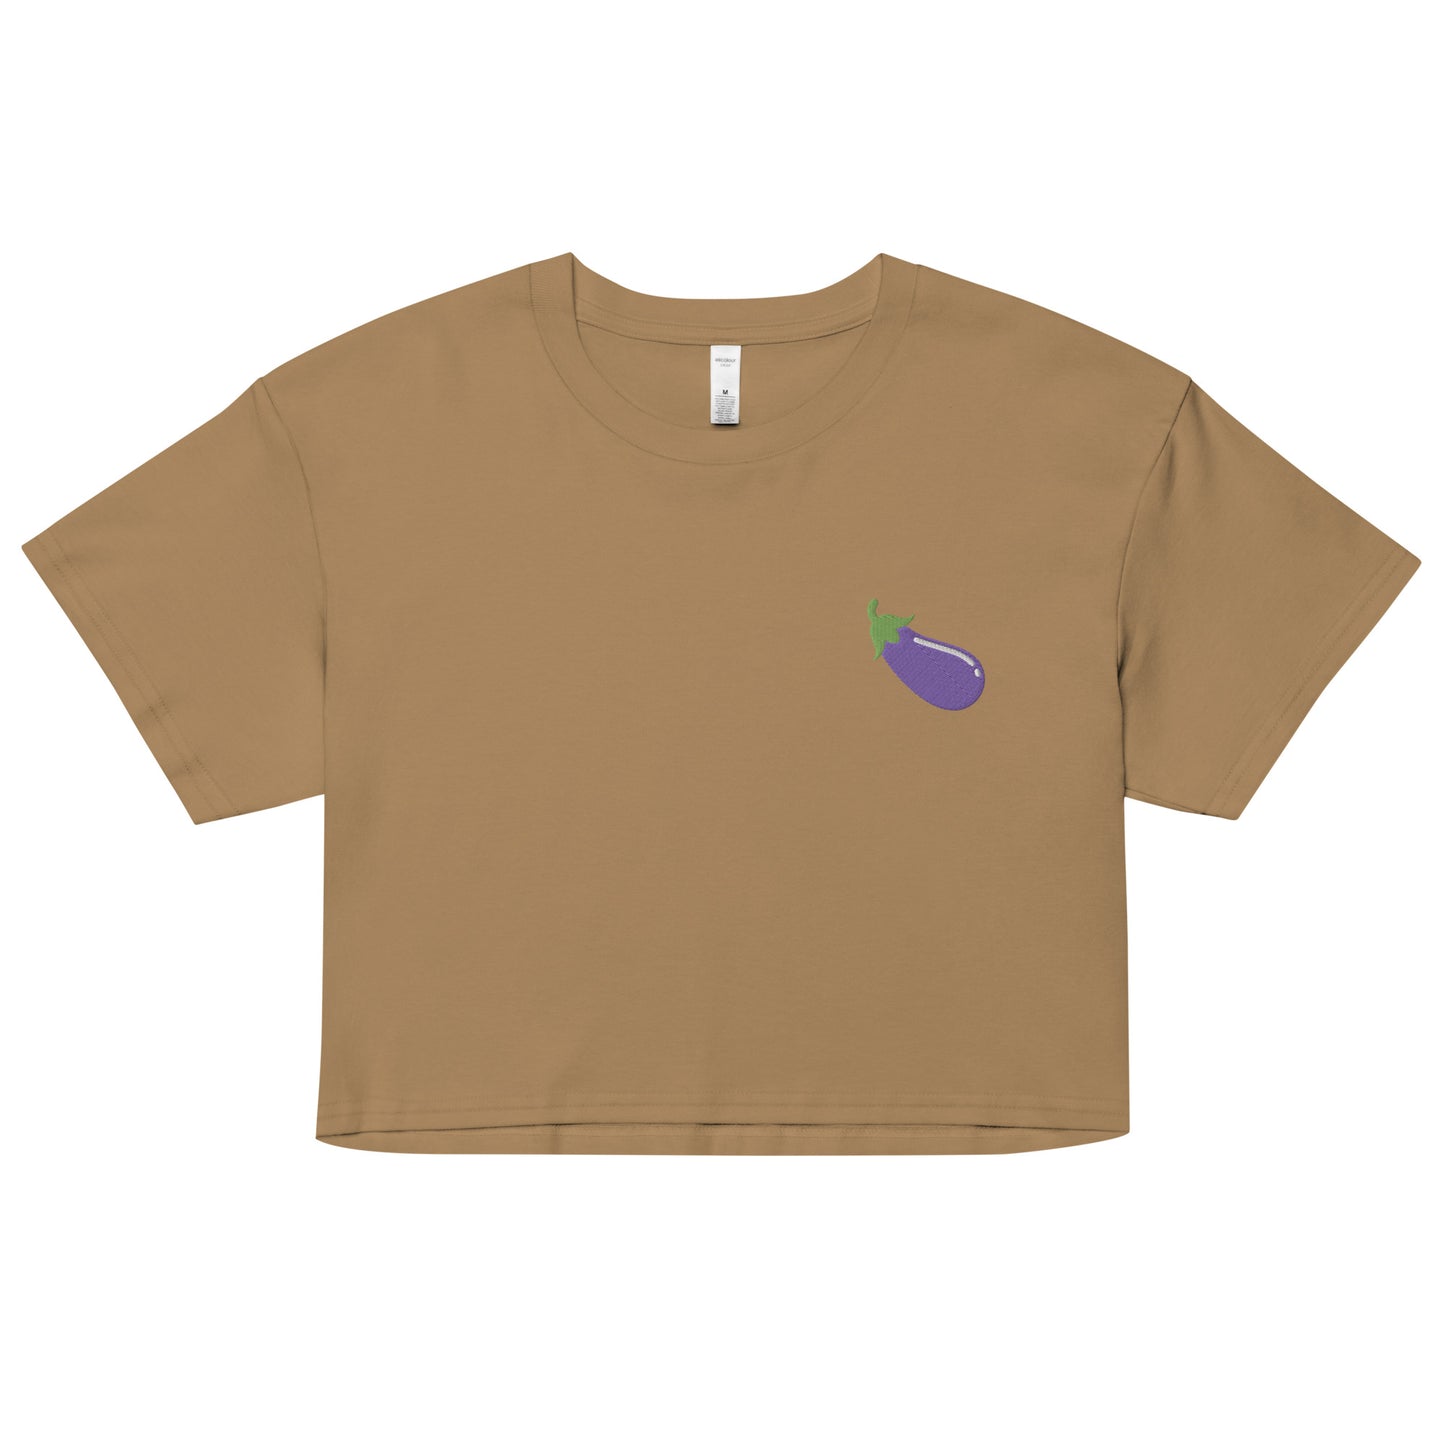 A relaxed camel crop top features a modest crop and subtle eggplant embroidered design, adding a touch of mischief to your look—a playful celebration of gay culture! Made from 100% combed cotton. Available in Extra Small, Small, Medium, Large, Extra Large.